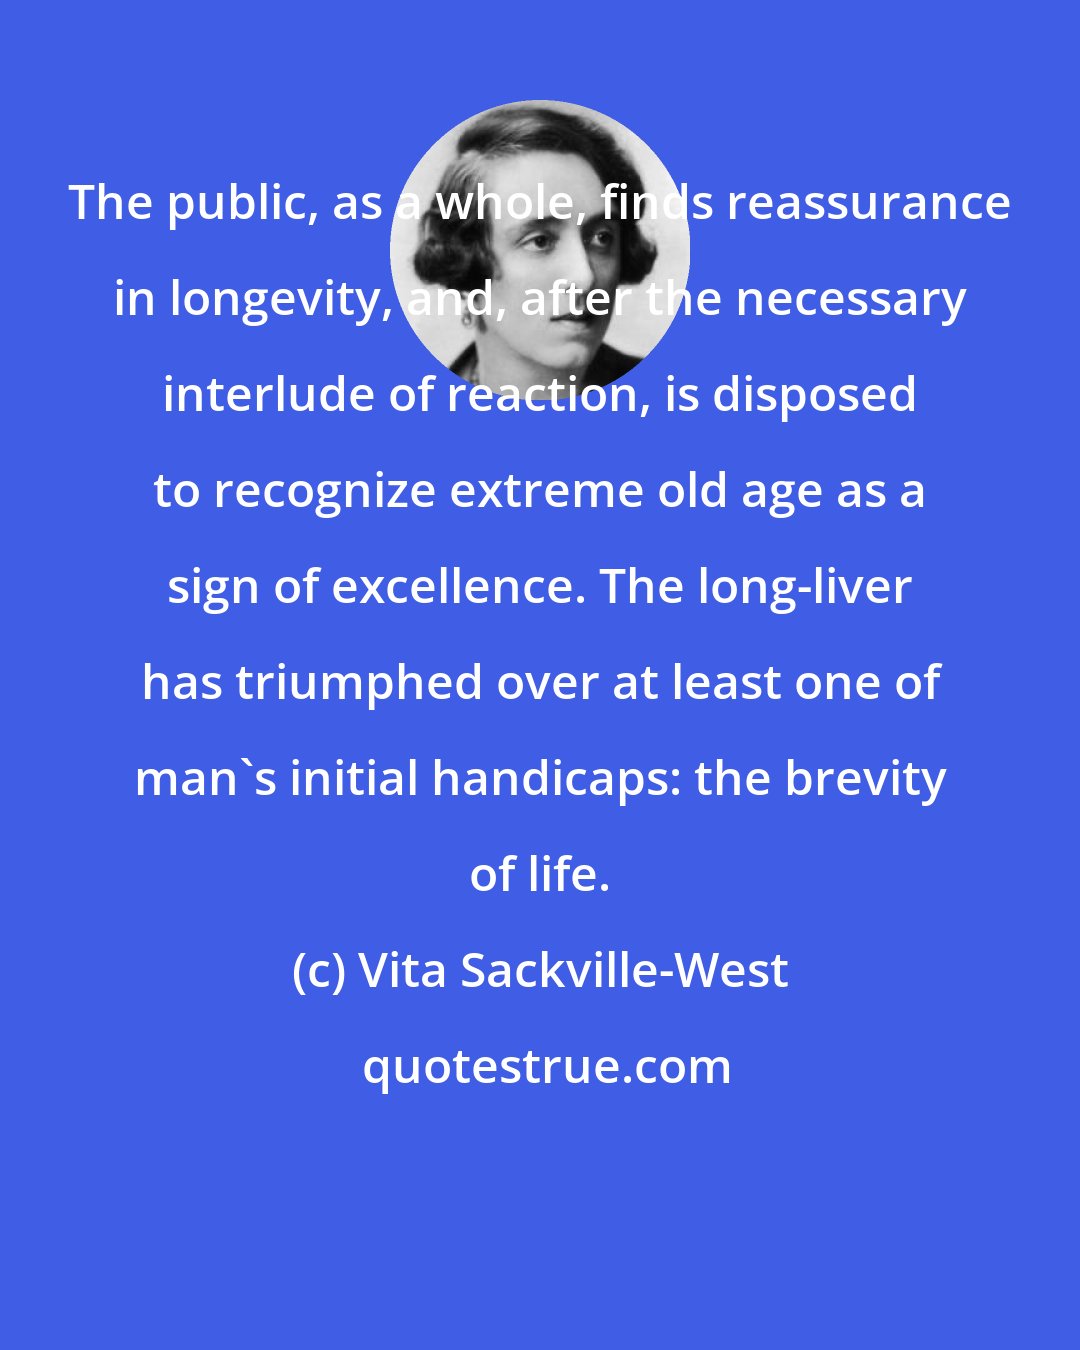 Vita Sackville-West: The public, as a whole, finds reassurance in longevity, and, after the necessary interlude of reaction, is disposed to recognize extreme old age as a sign of excellence. The long-liver has triumphed over at least one of man's initial handicaps: the brevity of life.